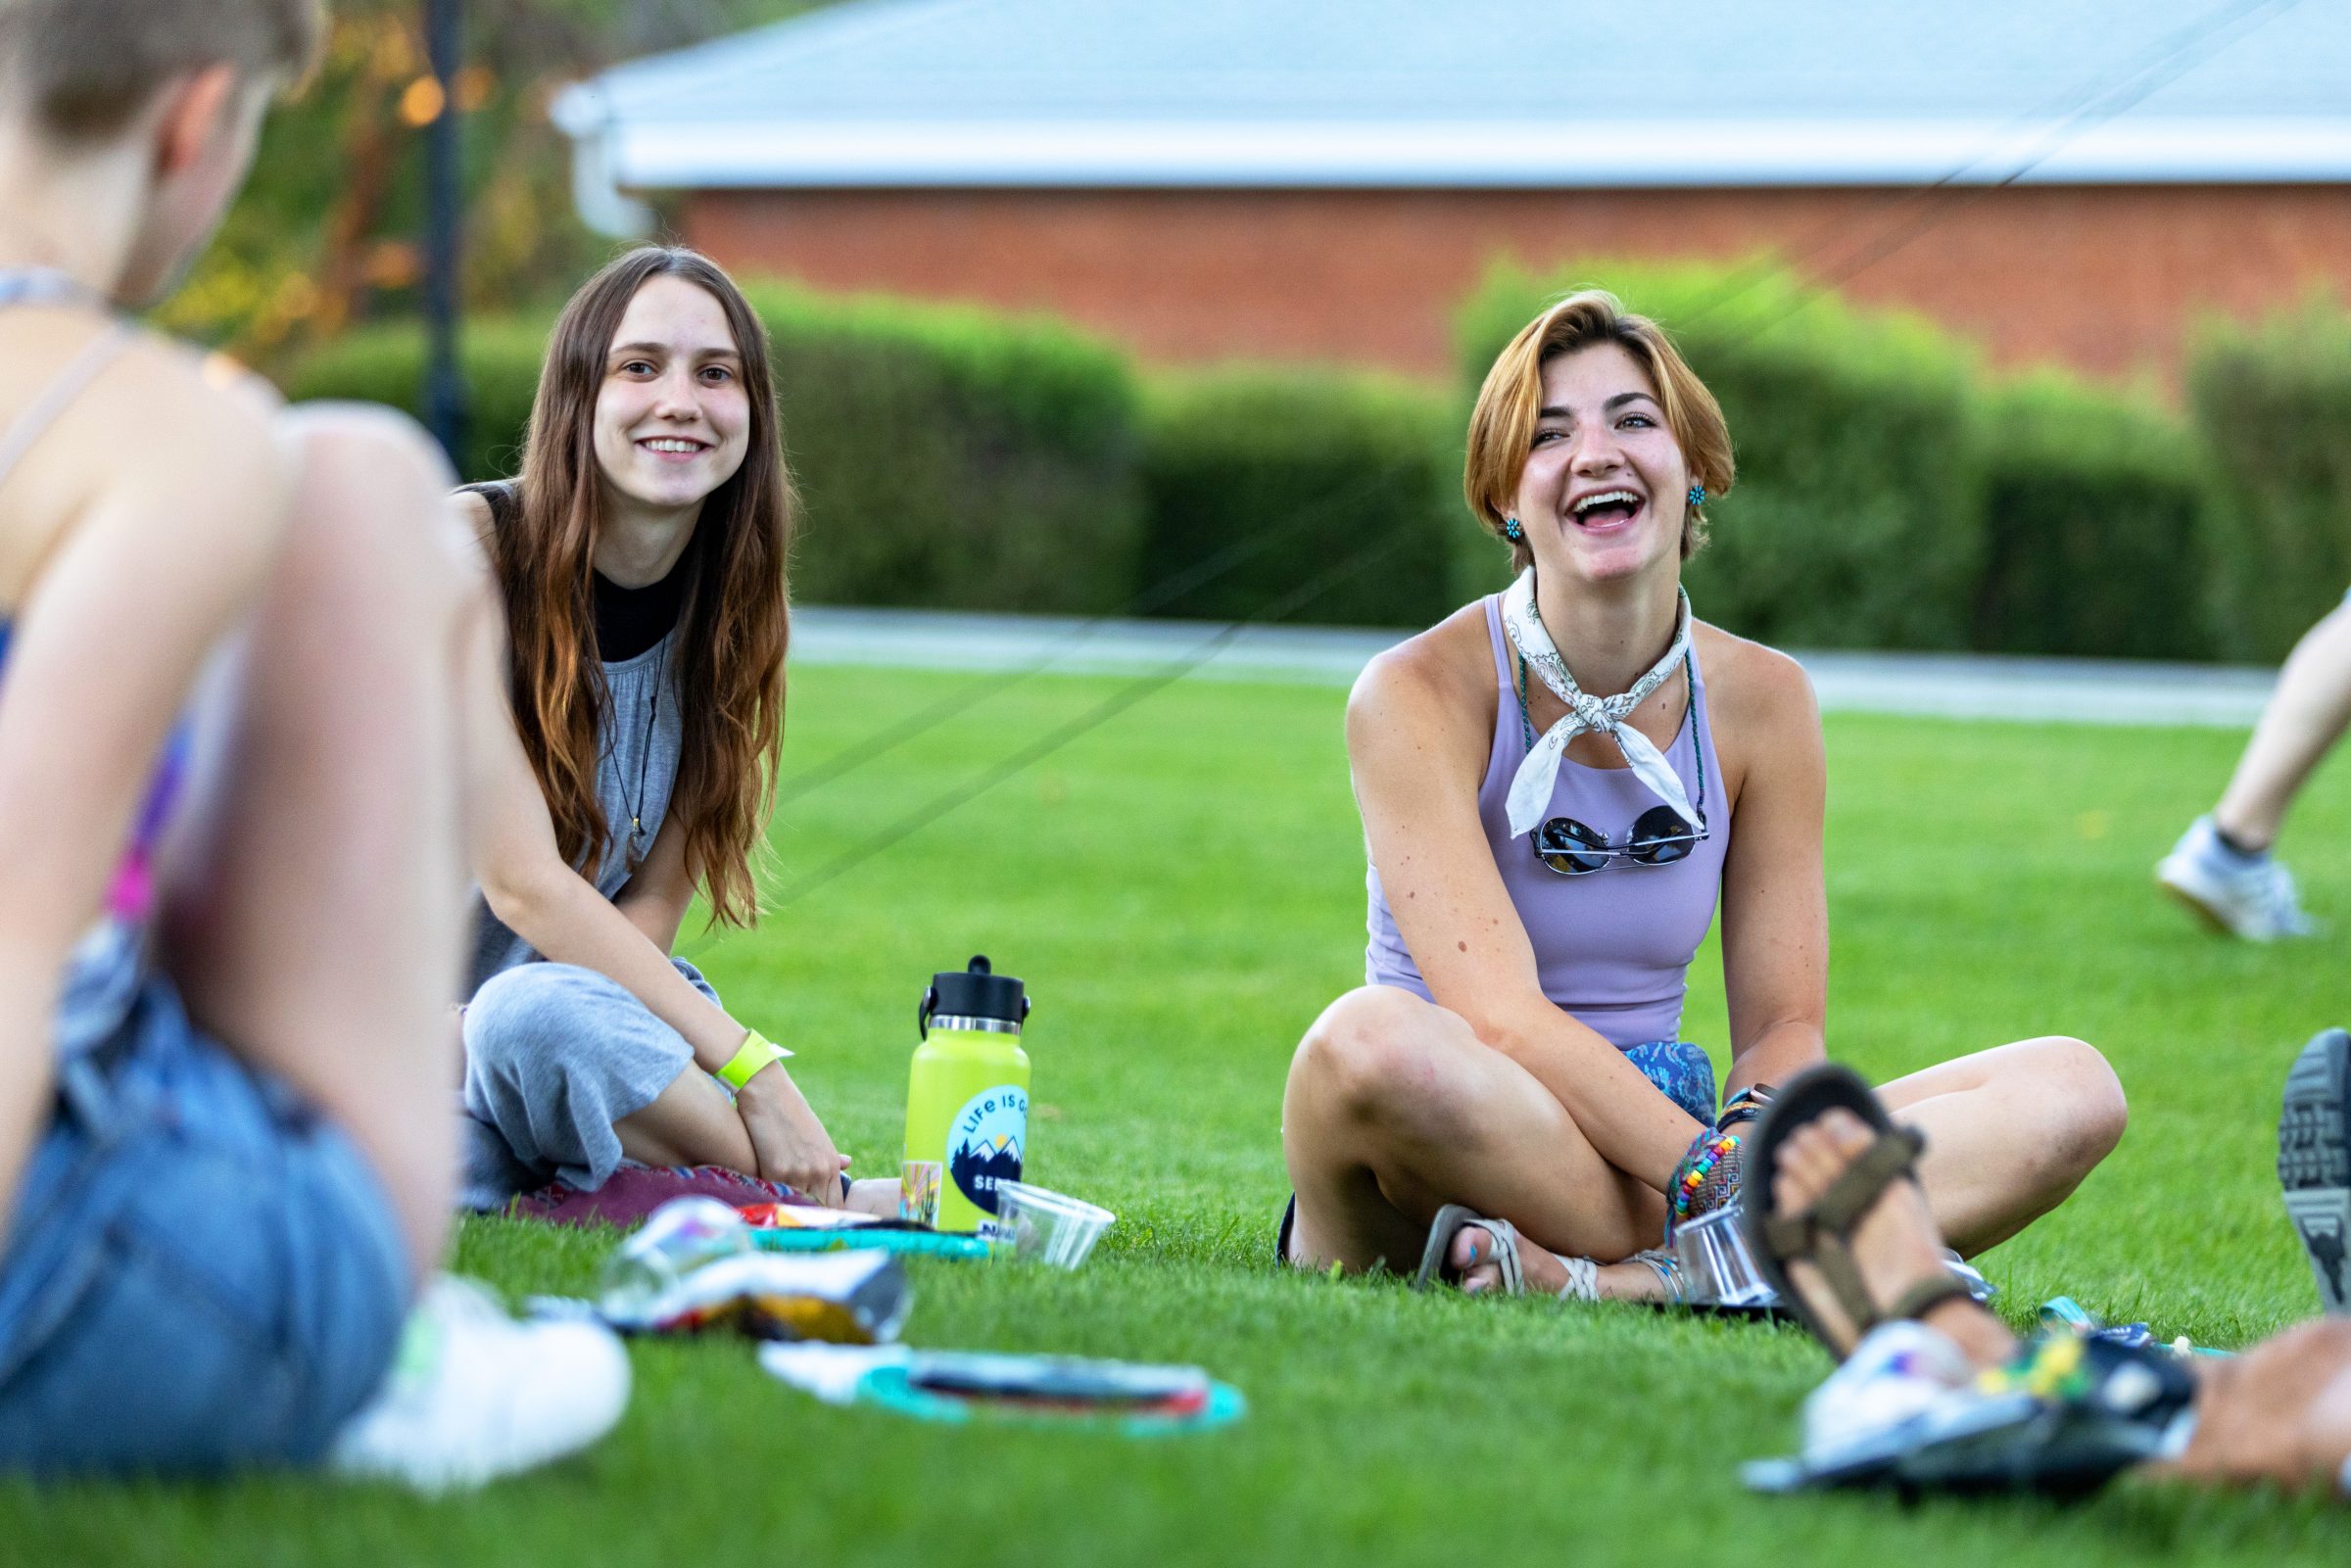 Students sitting on grassy field smiling